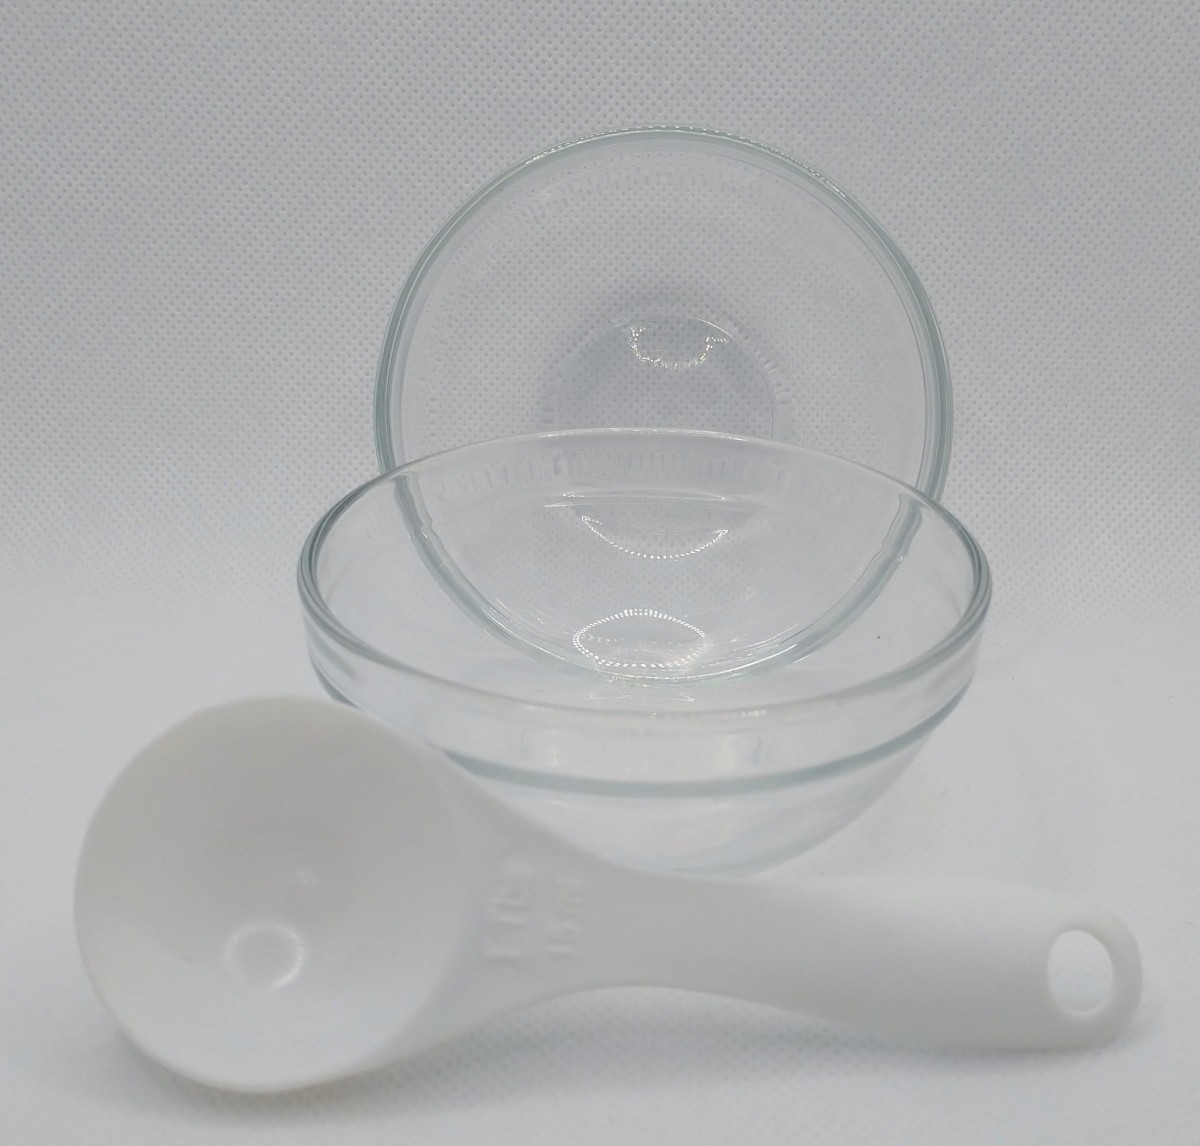 Two small glass bowls and a tablespoon measuring spoon